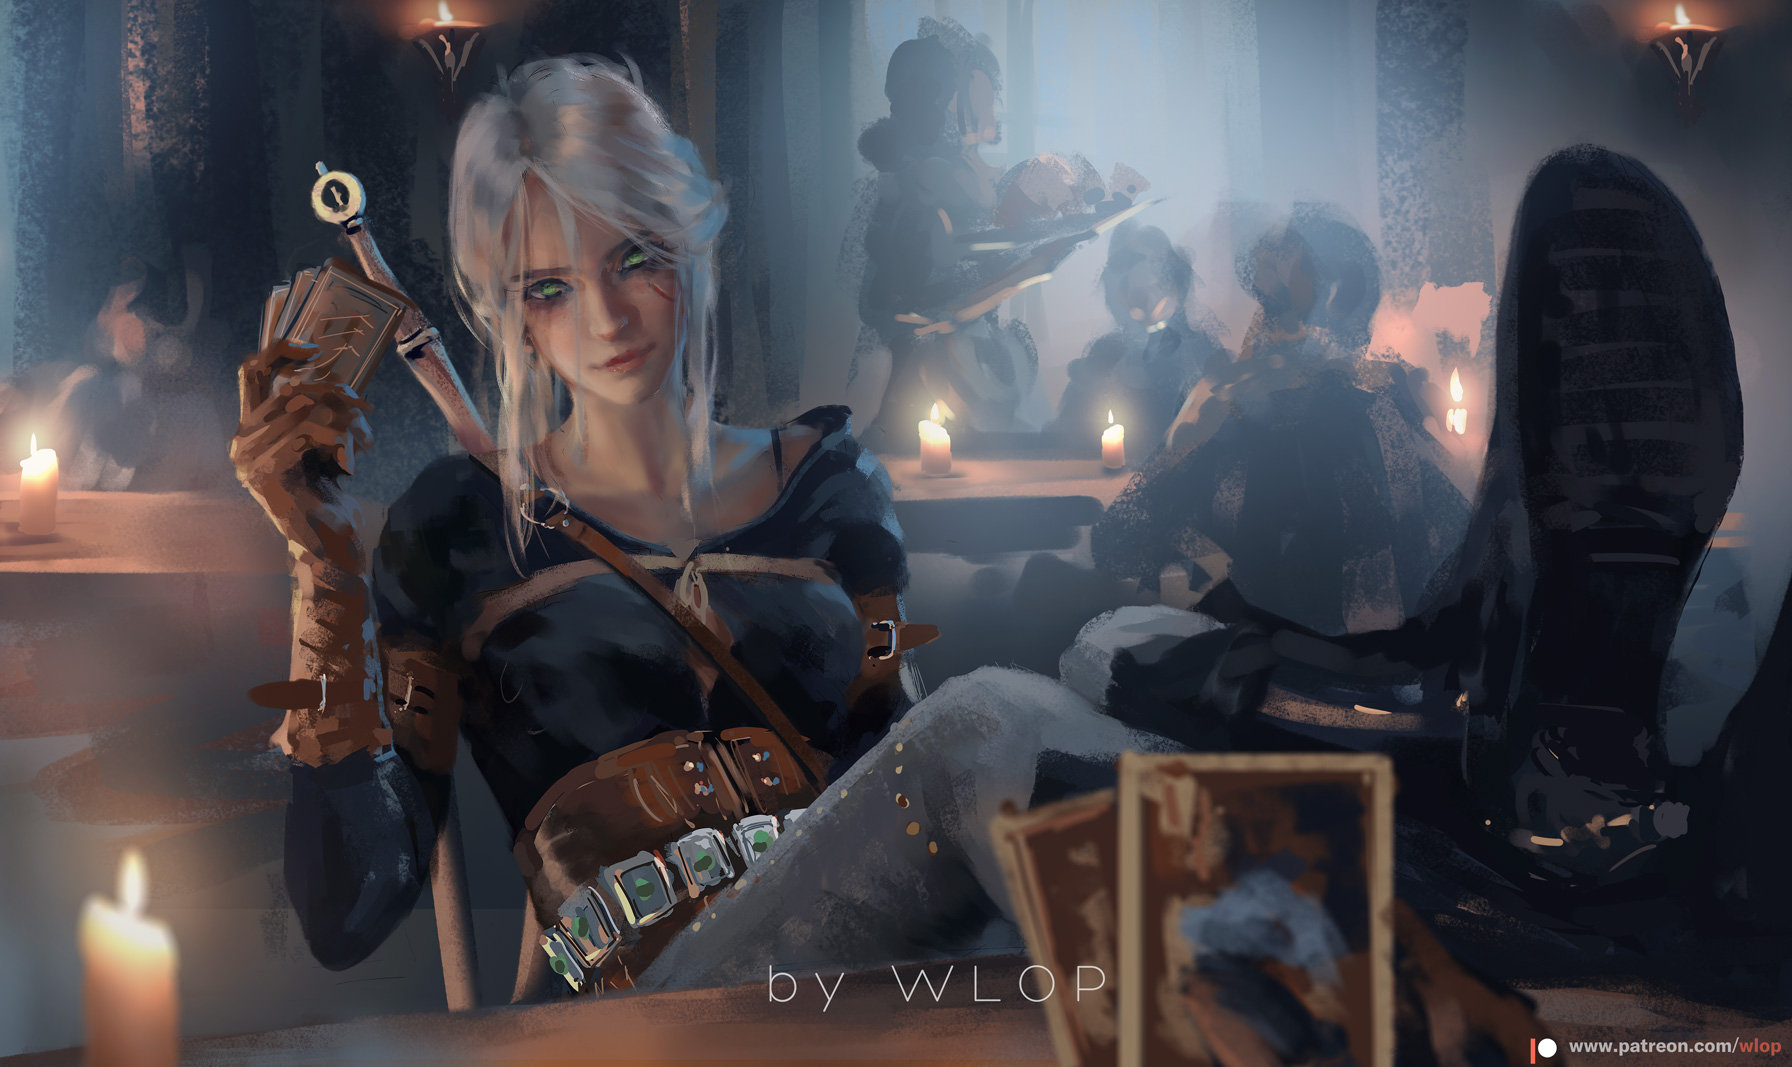 General 1792x1067 green eyes fantasy art fantasy girl Cirilla Fiona Elen Riannon The Witcher video game girls Video Game Heroes WLOP Gwent